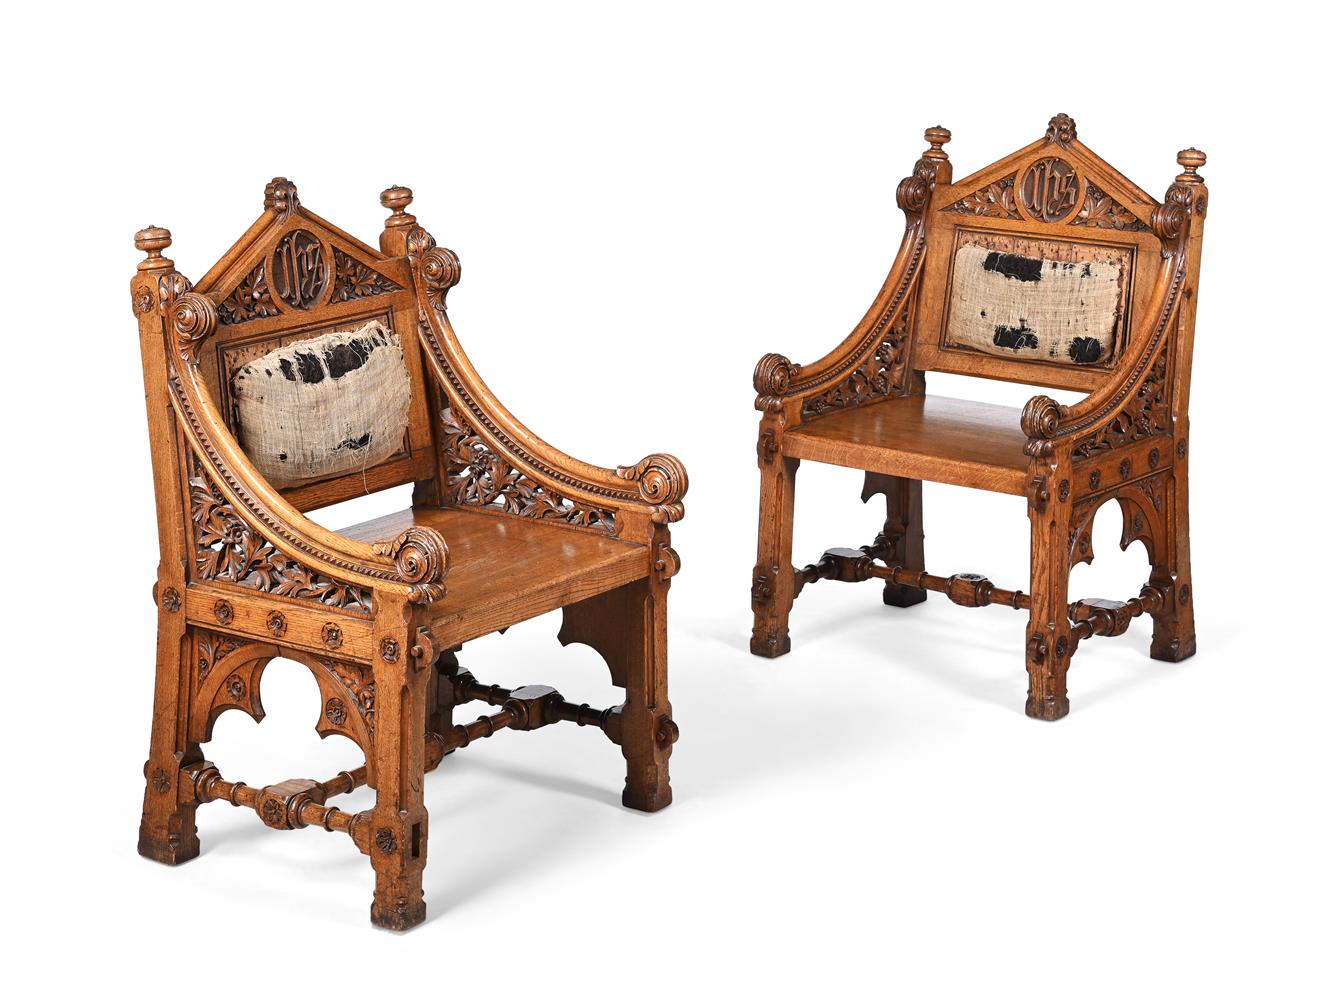 A PAIR OF VICTORIAN GOTHIC REVIVAL CARVED OAK THRONE CHAIRS, IN ECCLESIASTICAL TASTE - Image 2 of 3